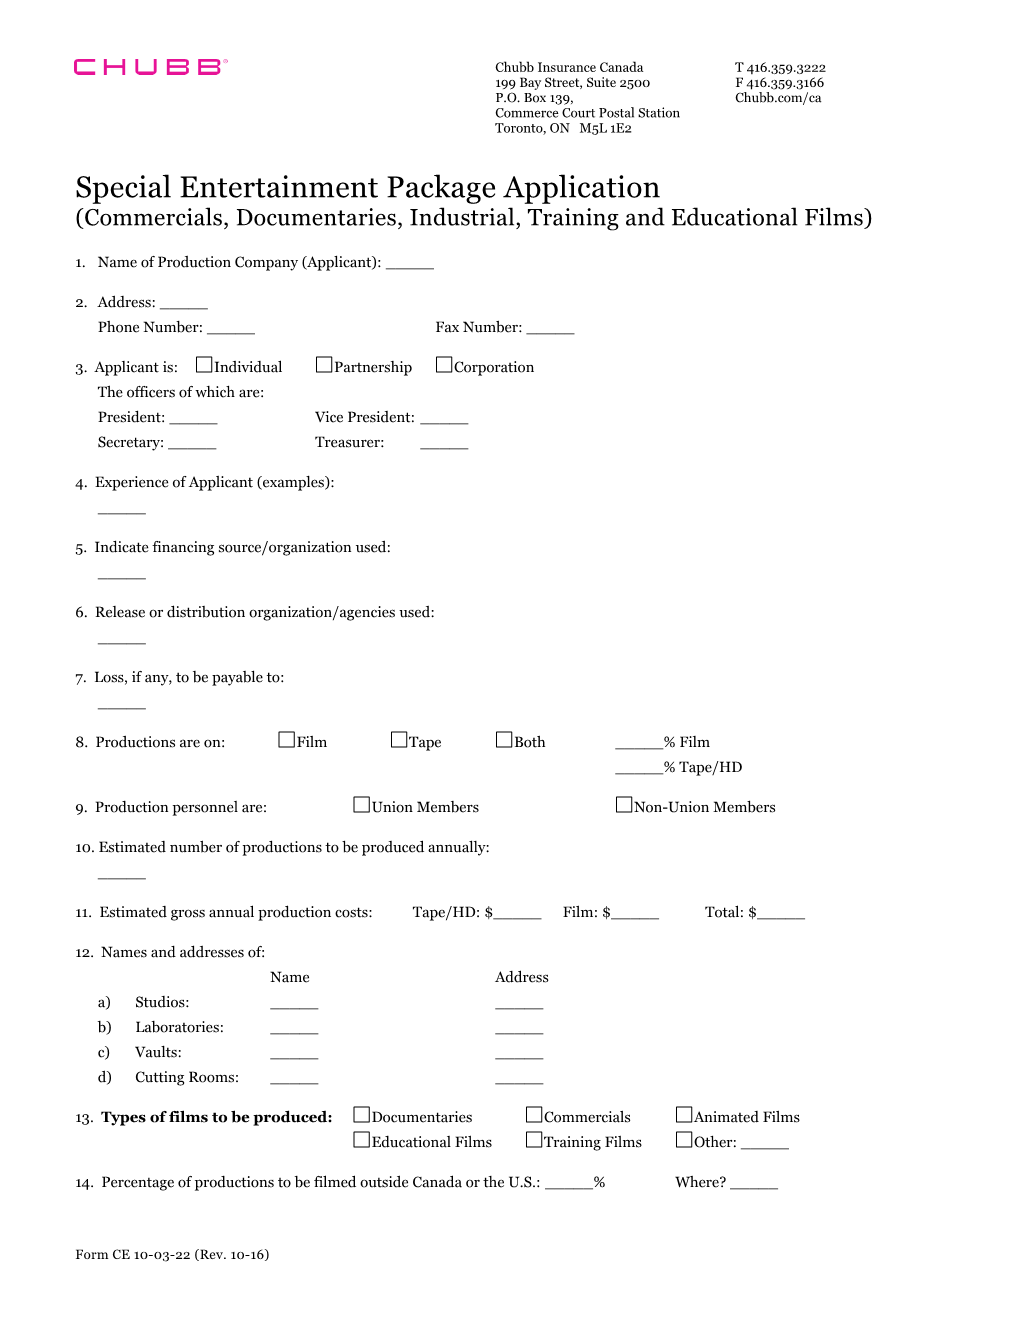 Special Entertainment Package Application